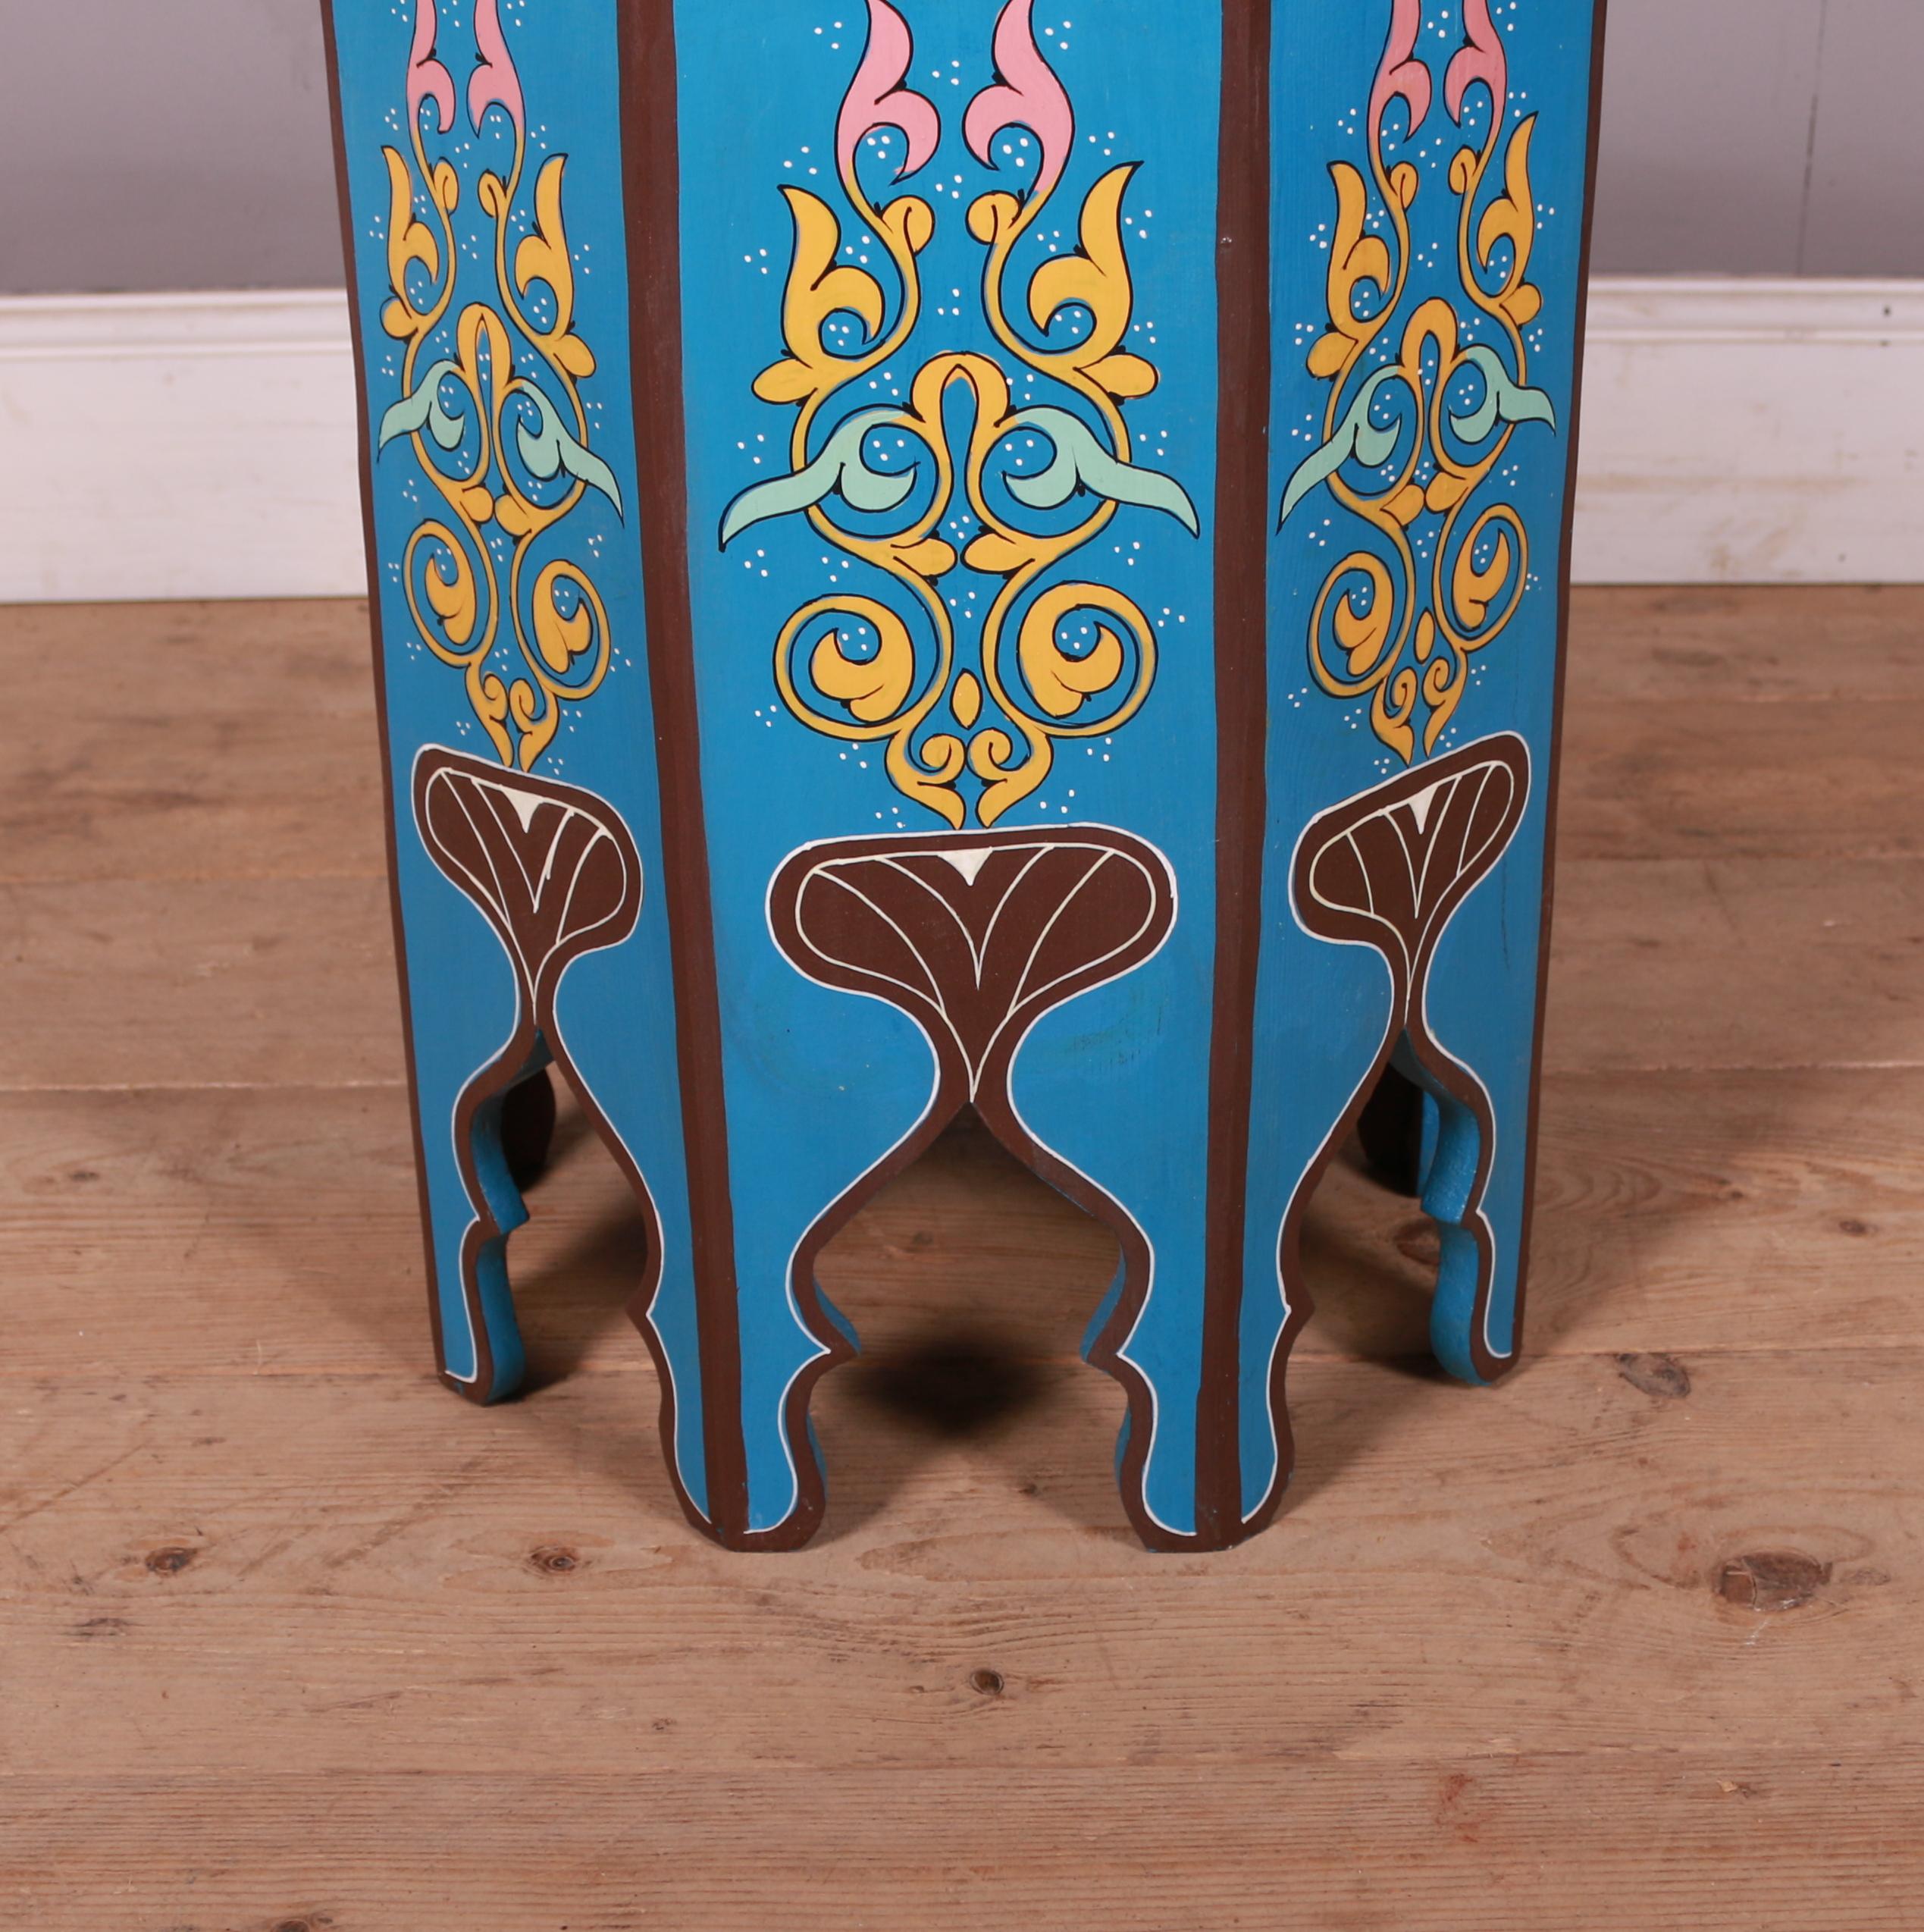 Bespoke hand-painted Moroccan side table.

Imported directly from Morocco and can be made to your specification.

Reference: 7331

Dimensions
20 inches (51 cms) high
17.5 inches (44 cms) diameter.